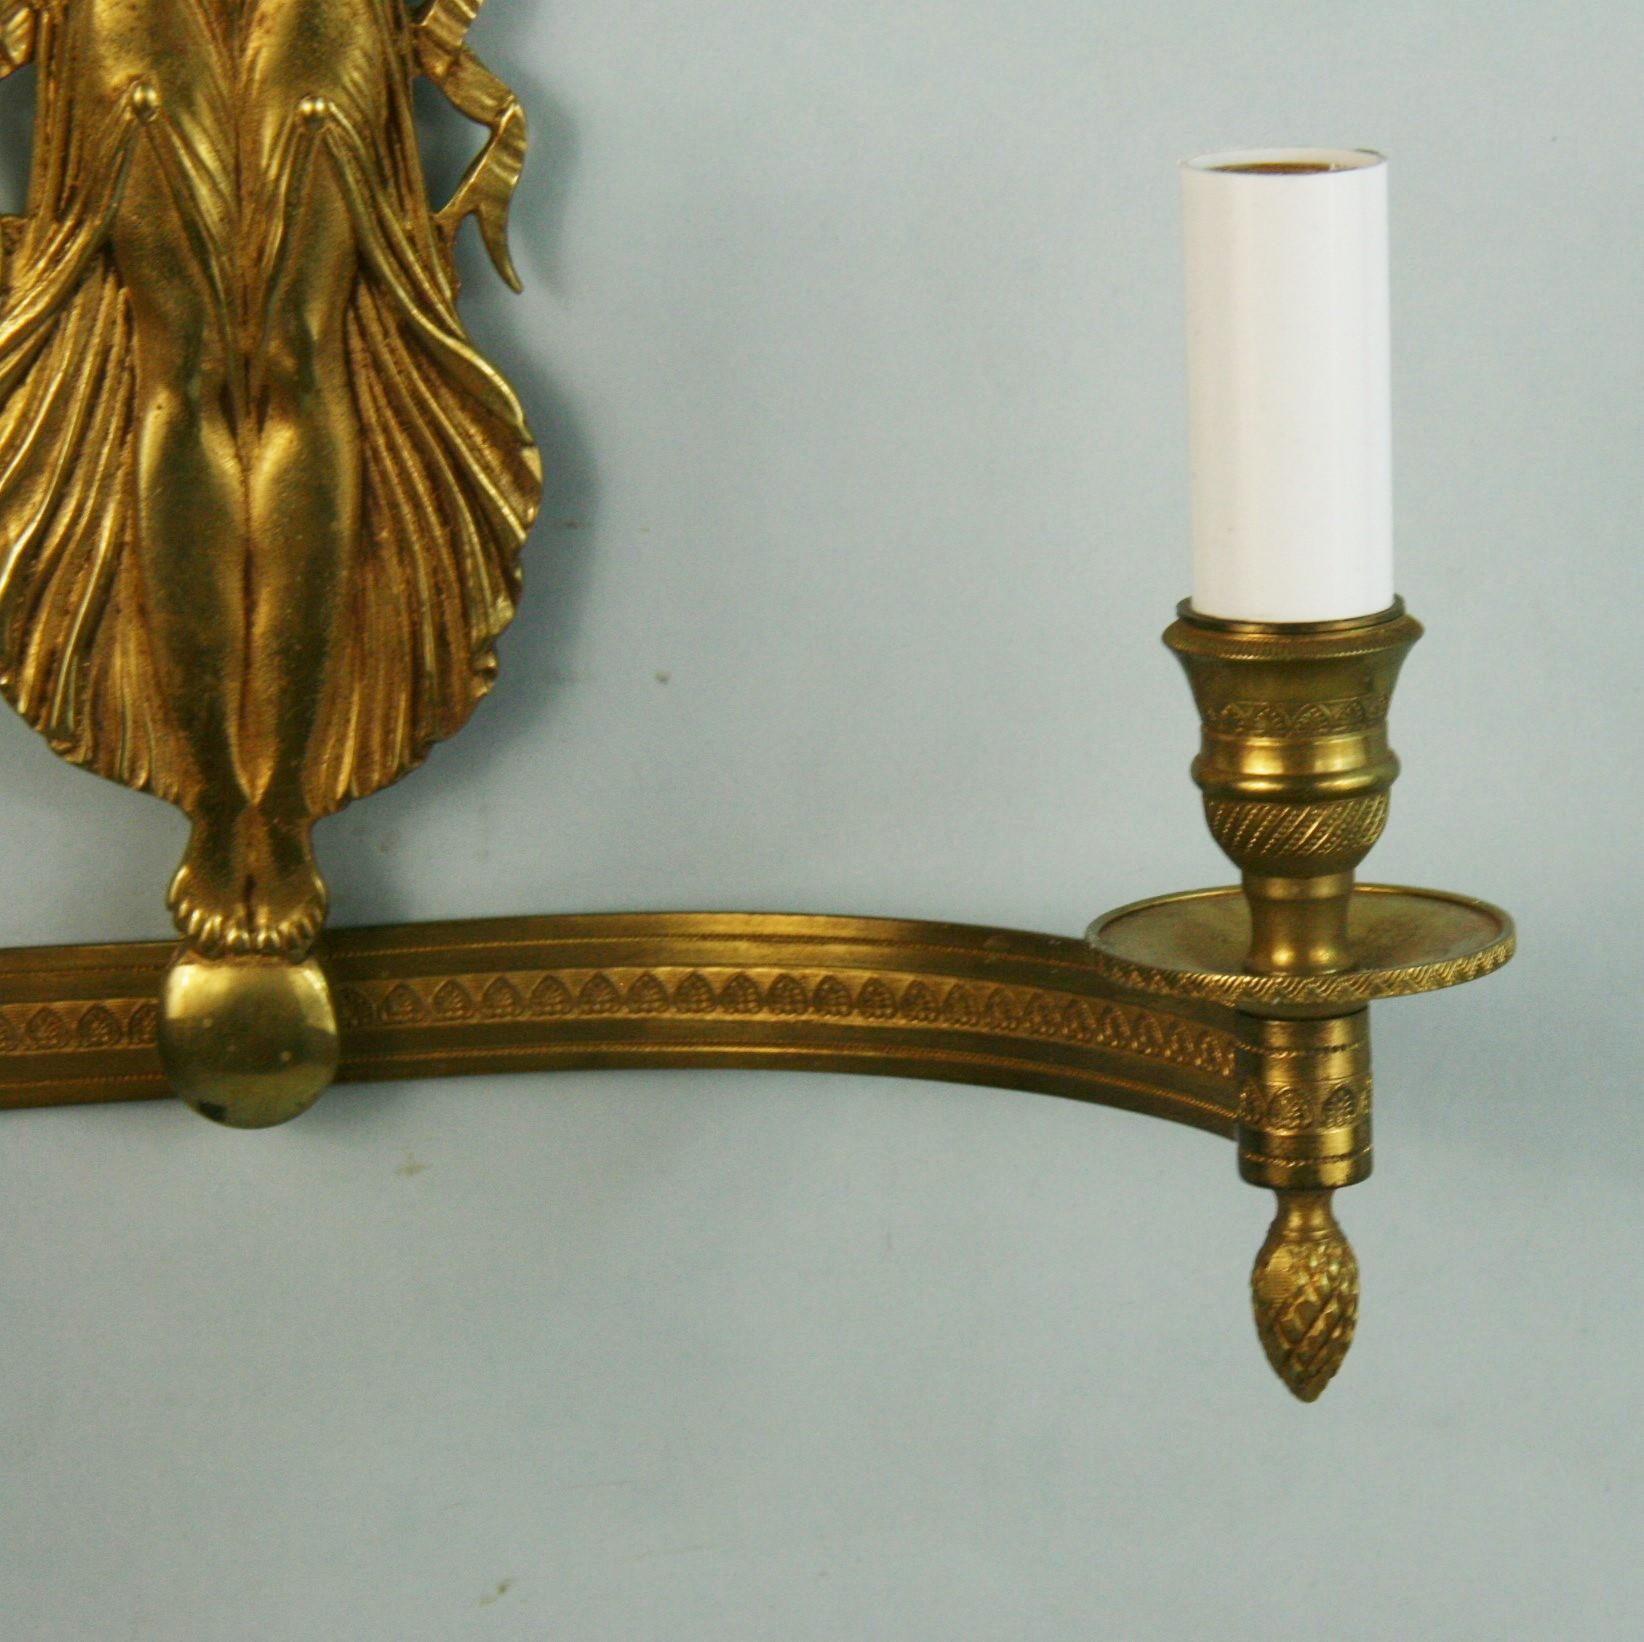  French Empire  Winged Figural Wall Sconces 1920's a Pair For Sale 1